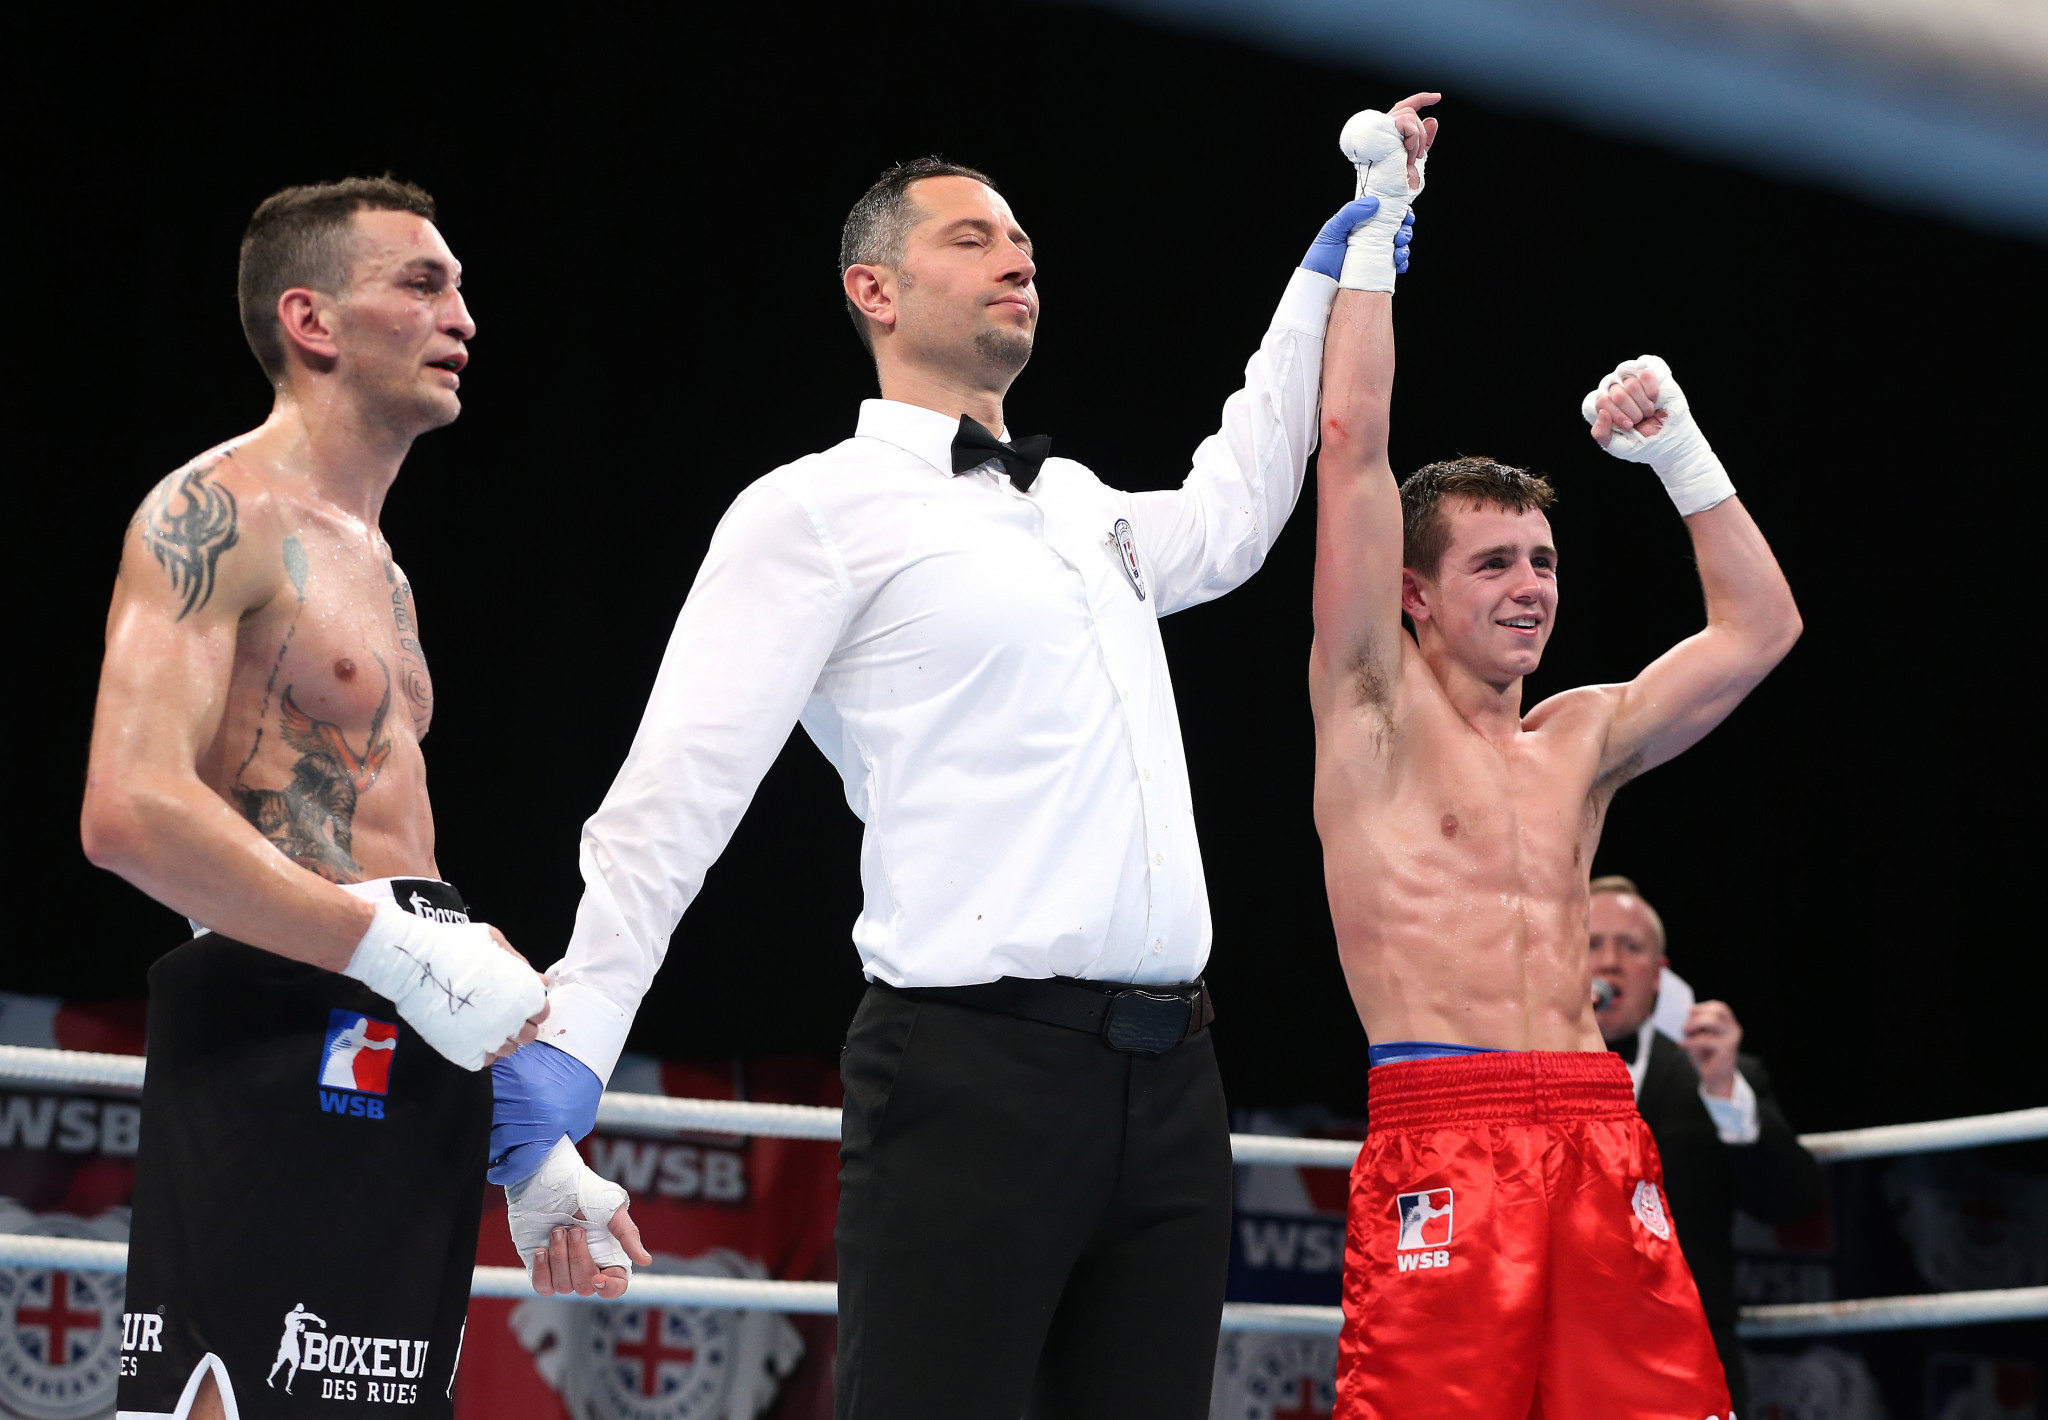 British Lionhearts seek repeat victory against Italia Thunder in World Series of Boxing